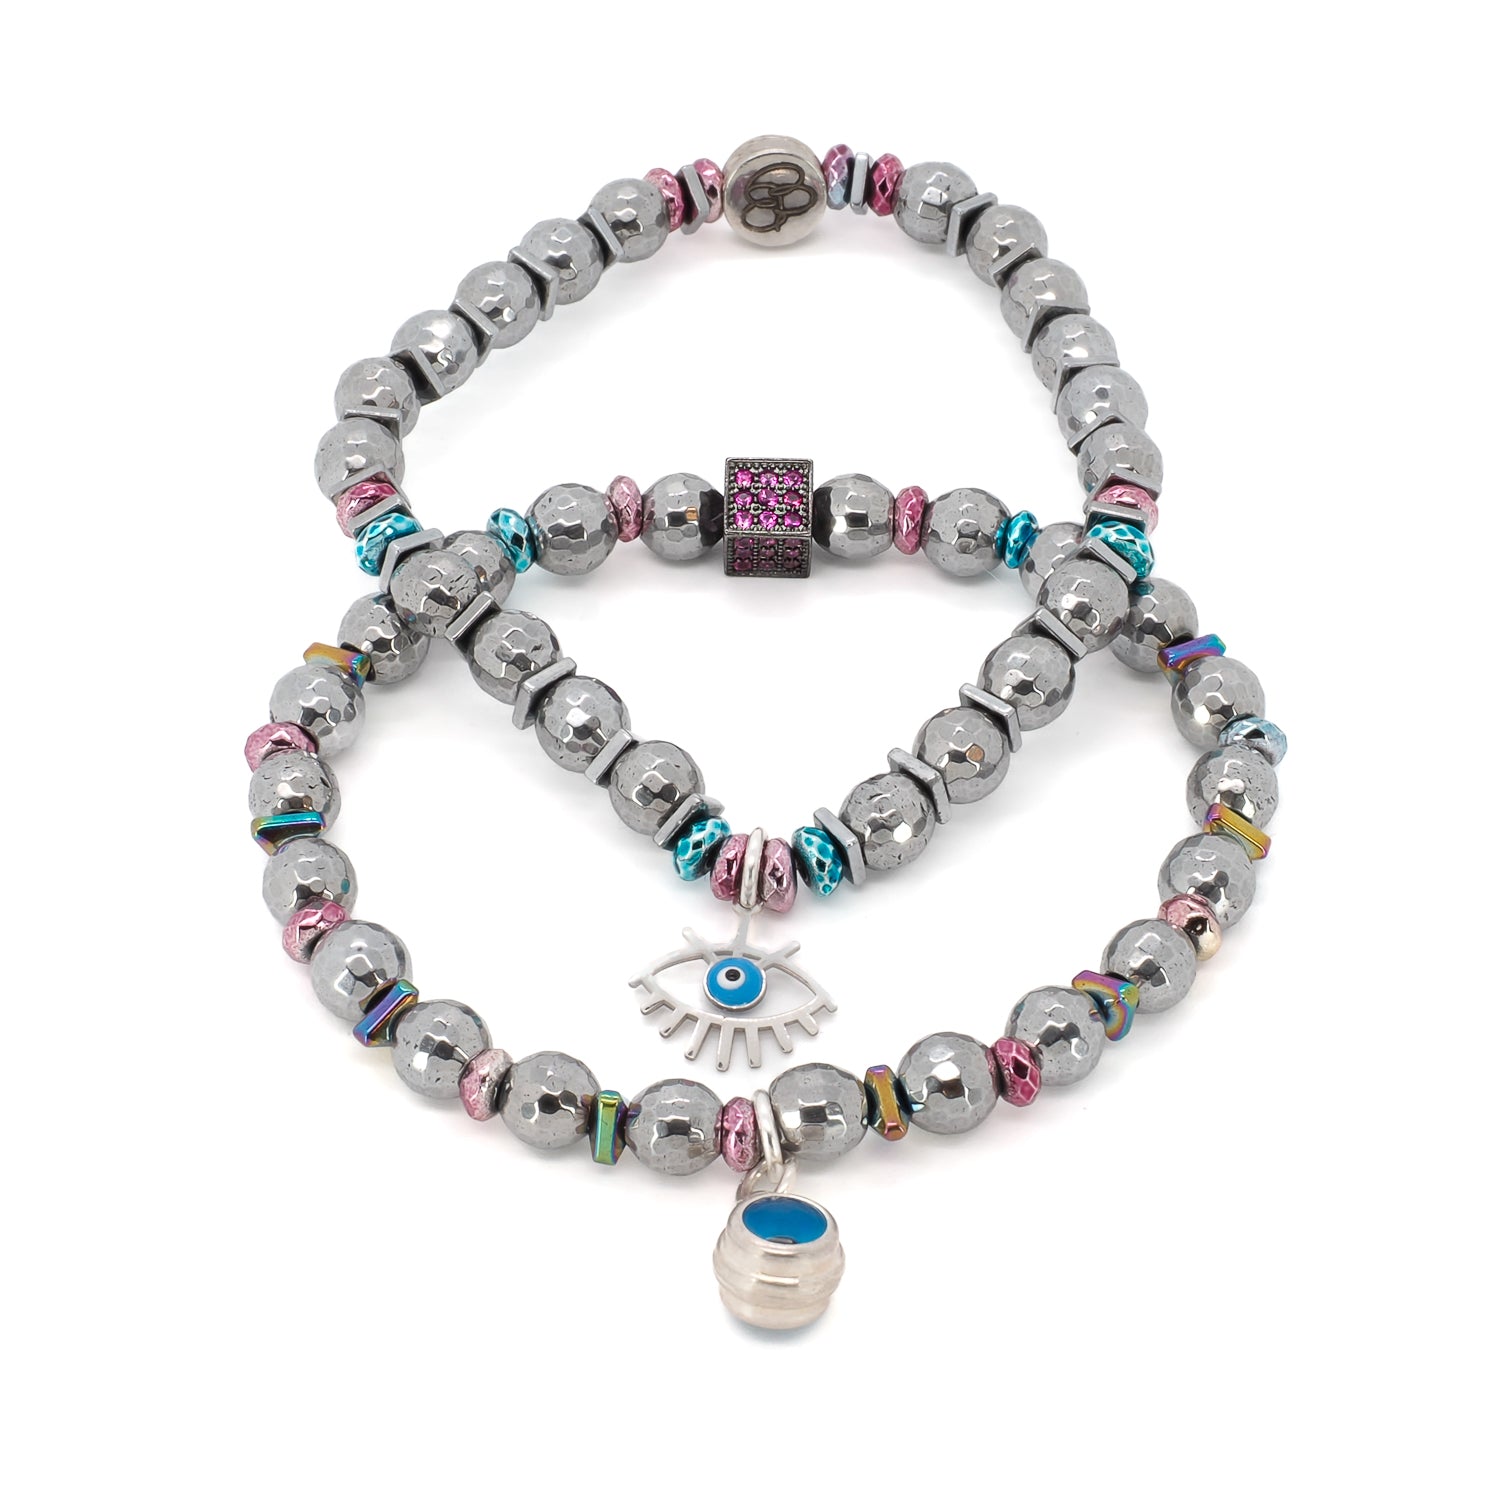 Eye Protection Hematite Bracelet Set - Handmade jewelry featuring silver faceted hematite stone beads, pink and blue hematite spacers, and a Sterling silver Evil Eye charm.